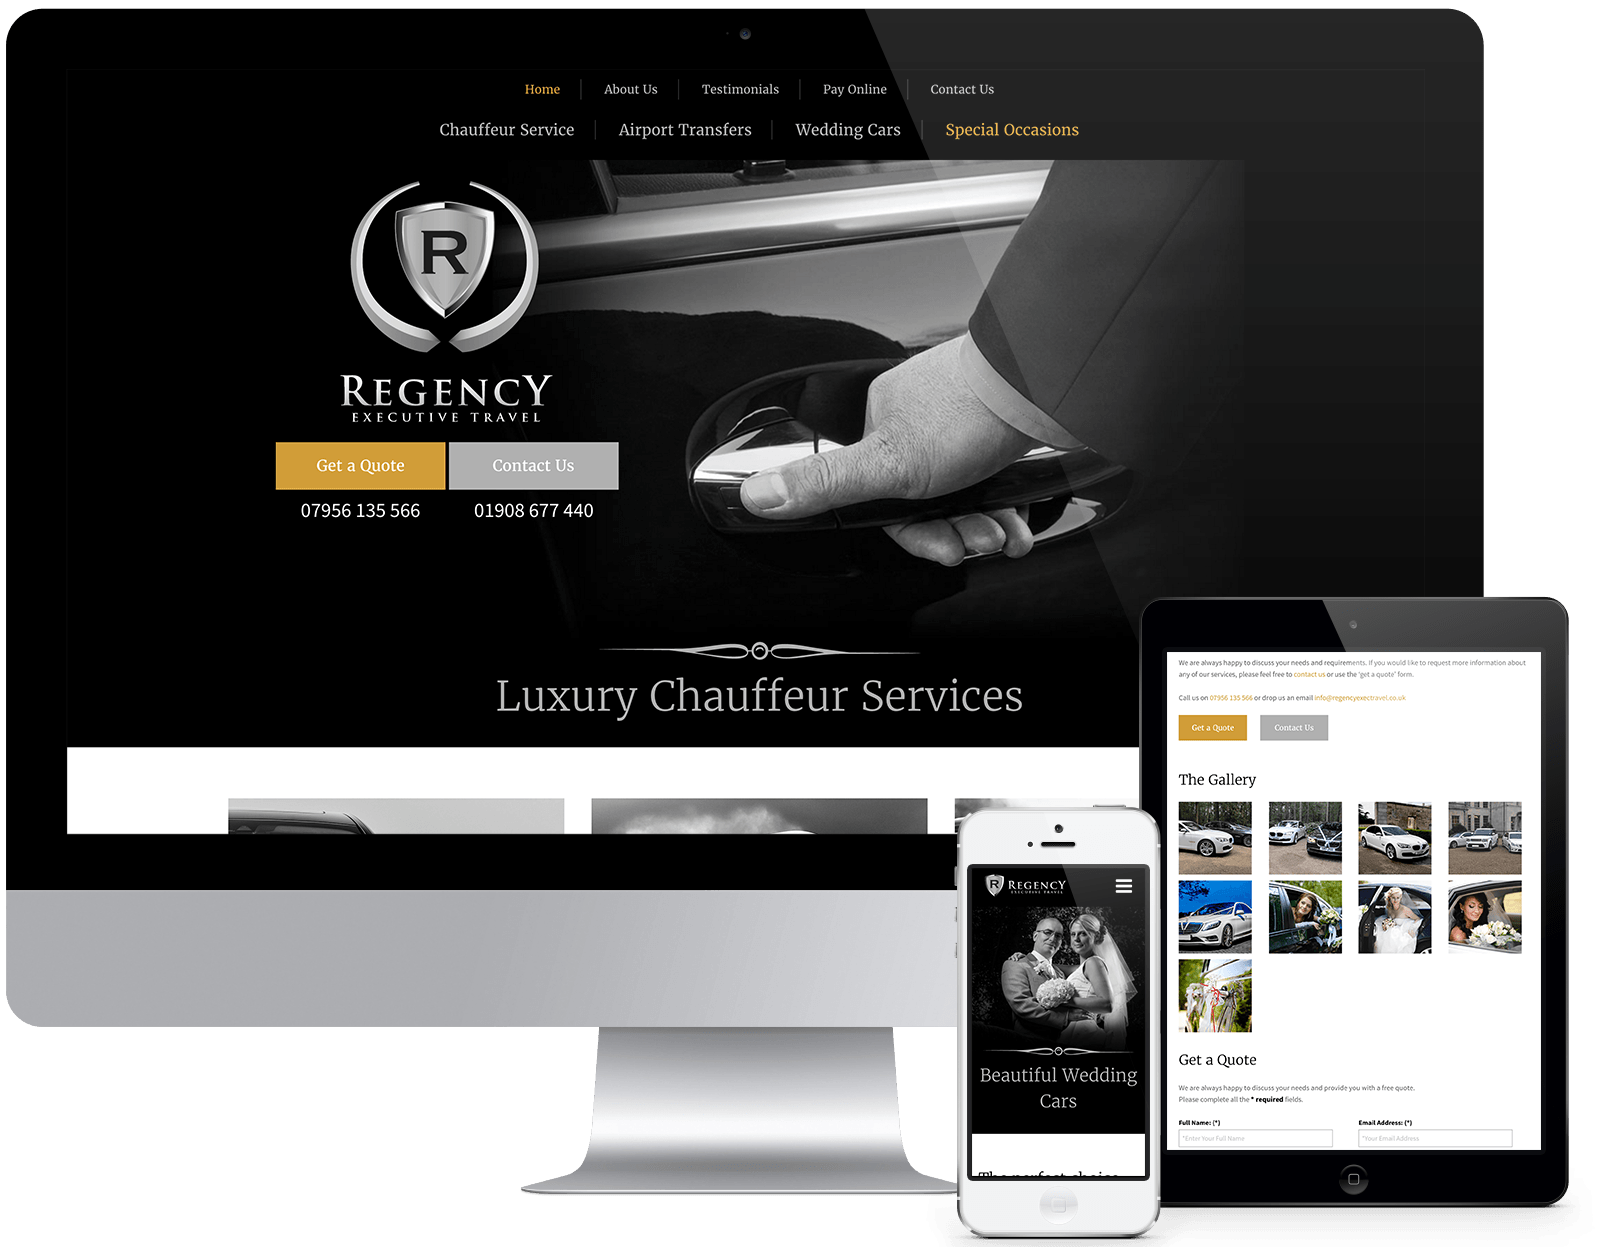 Regency Executive Travel - View Project